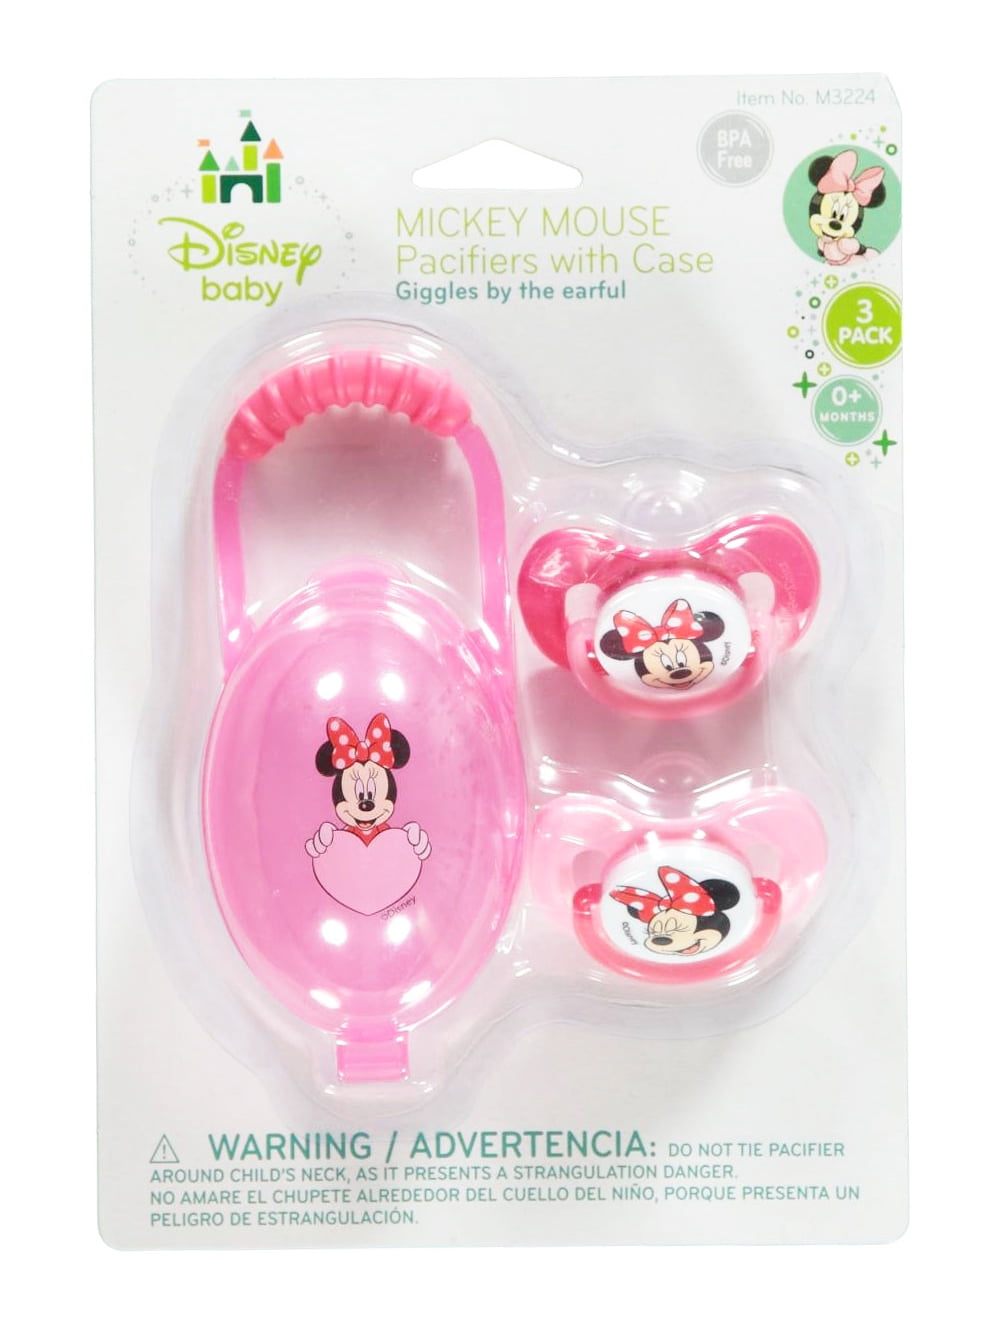 2-Pack Baby Pacifier Holders Minnie Mickey Mouse 